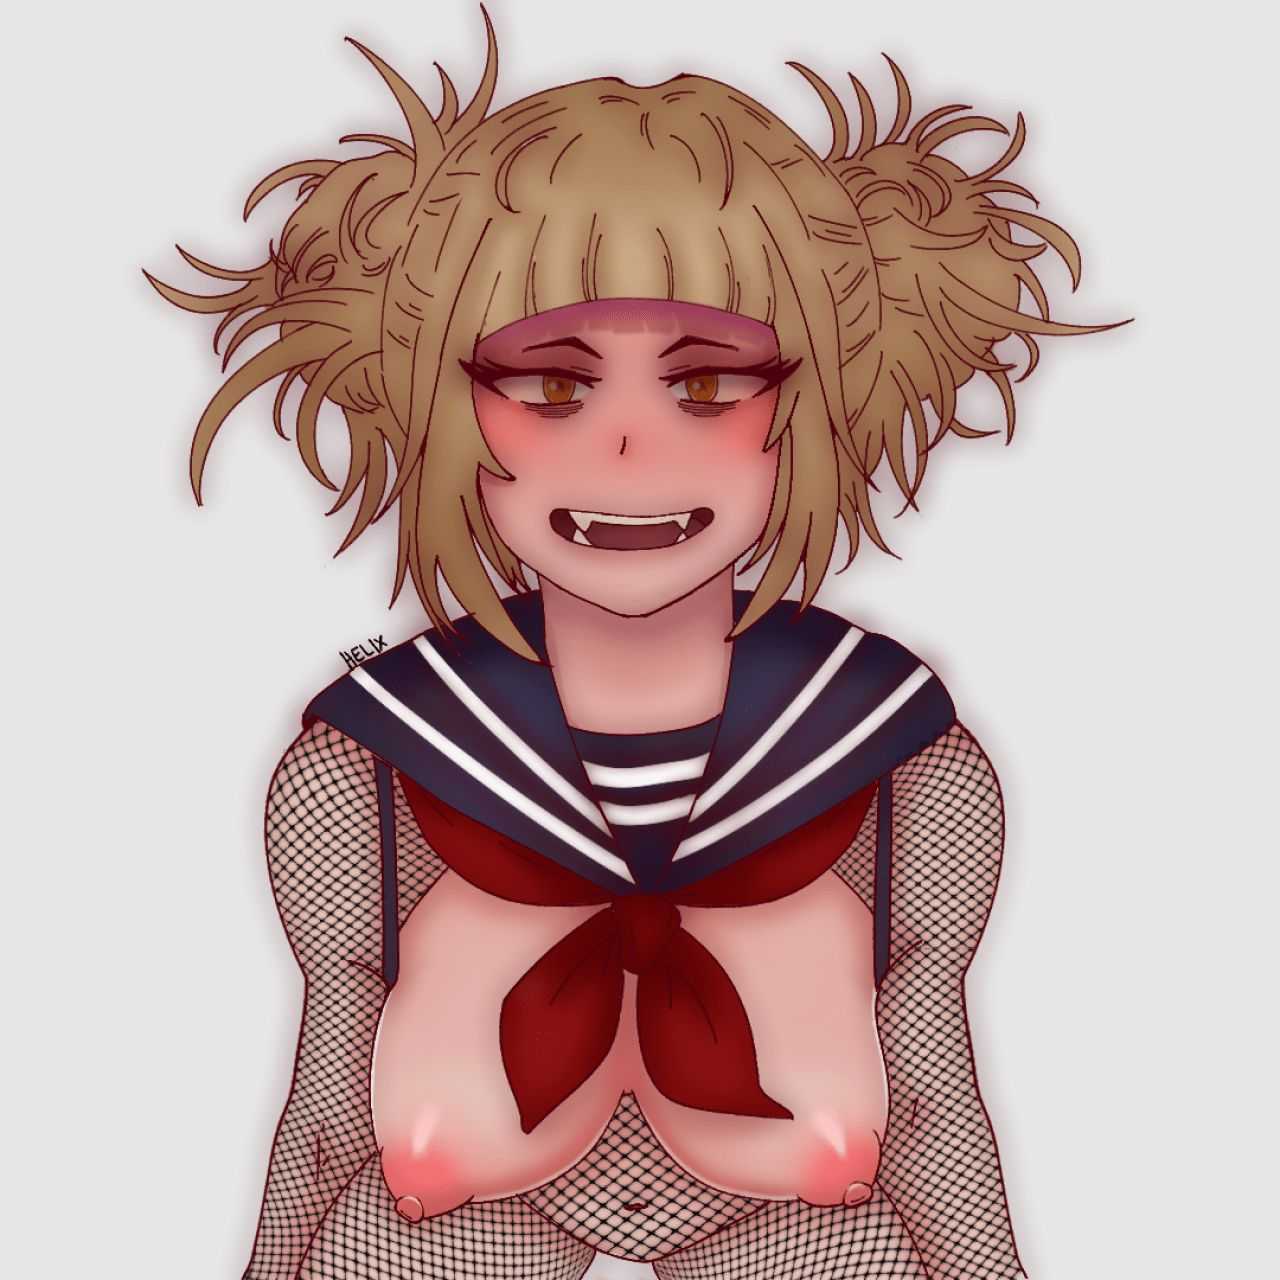 toga-own-work.png